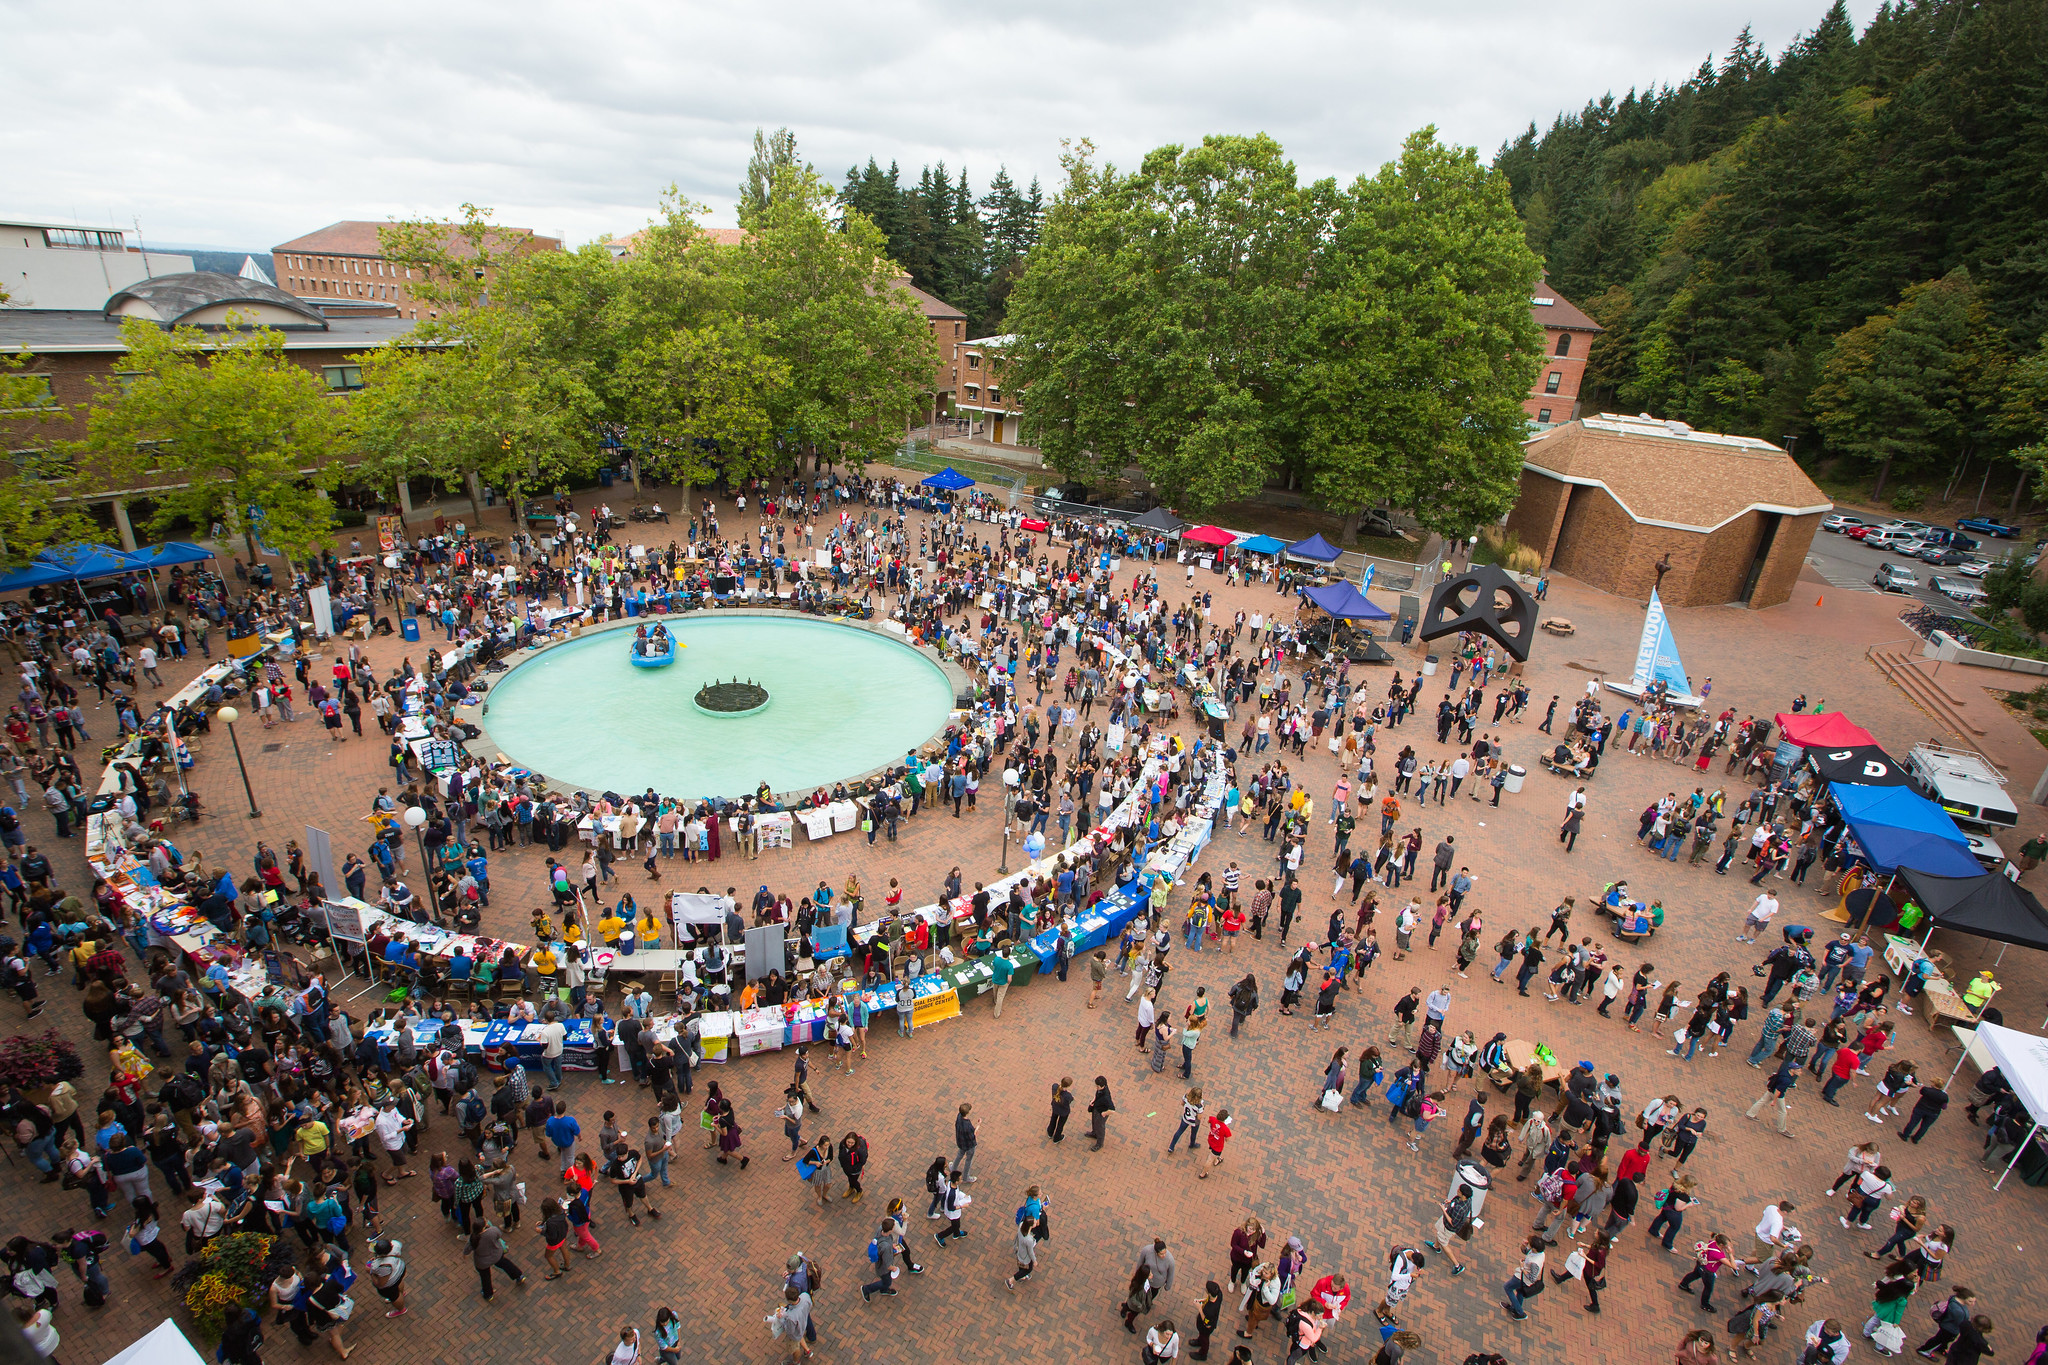 An aerial view of Red square, a brick courtyard lined with trees and buildings. There is a round fountain in the middle of the square, and two rings of tables and booths are set up around the fountain because an info fair is happening. There are hundreds of students interacting with each other and the tables.